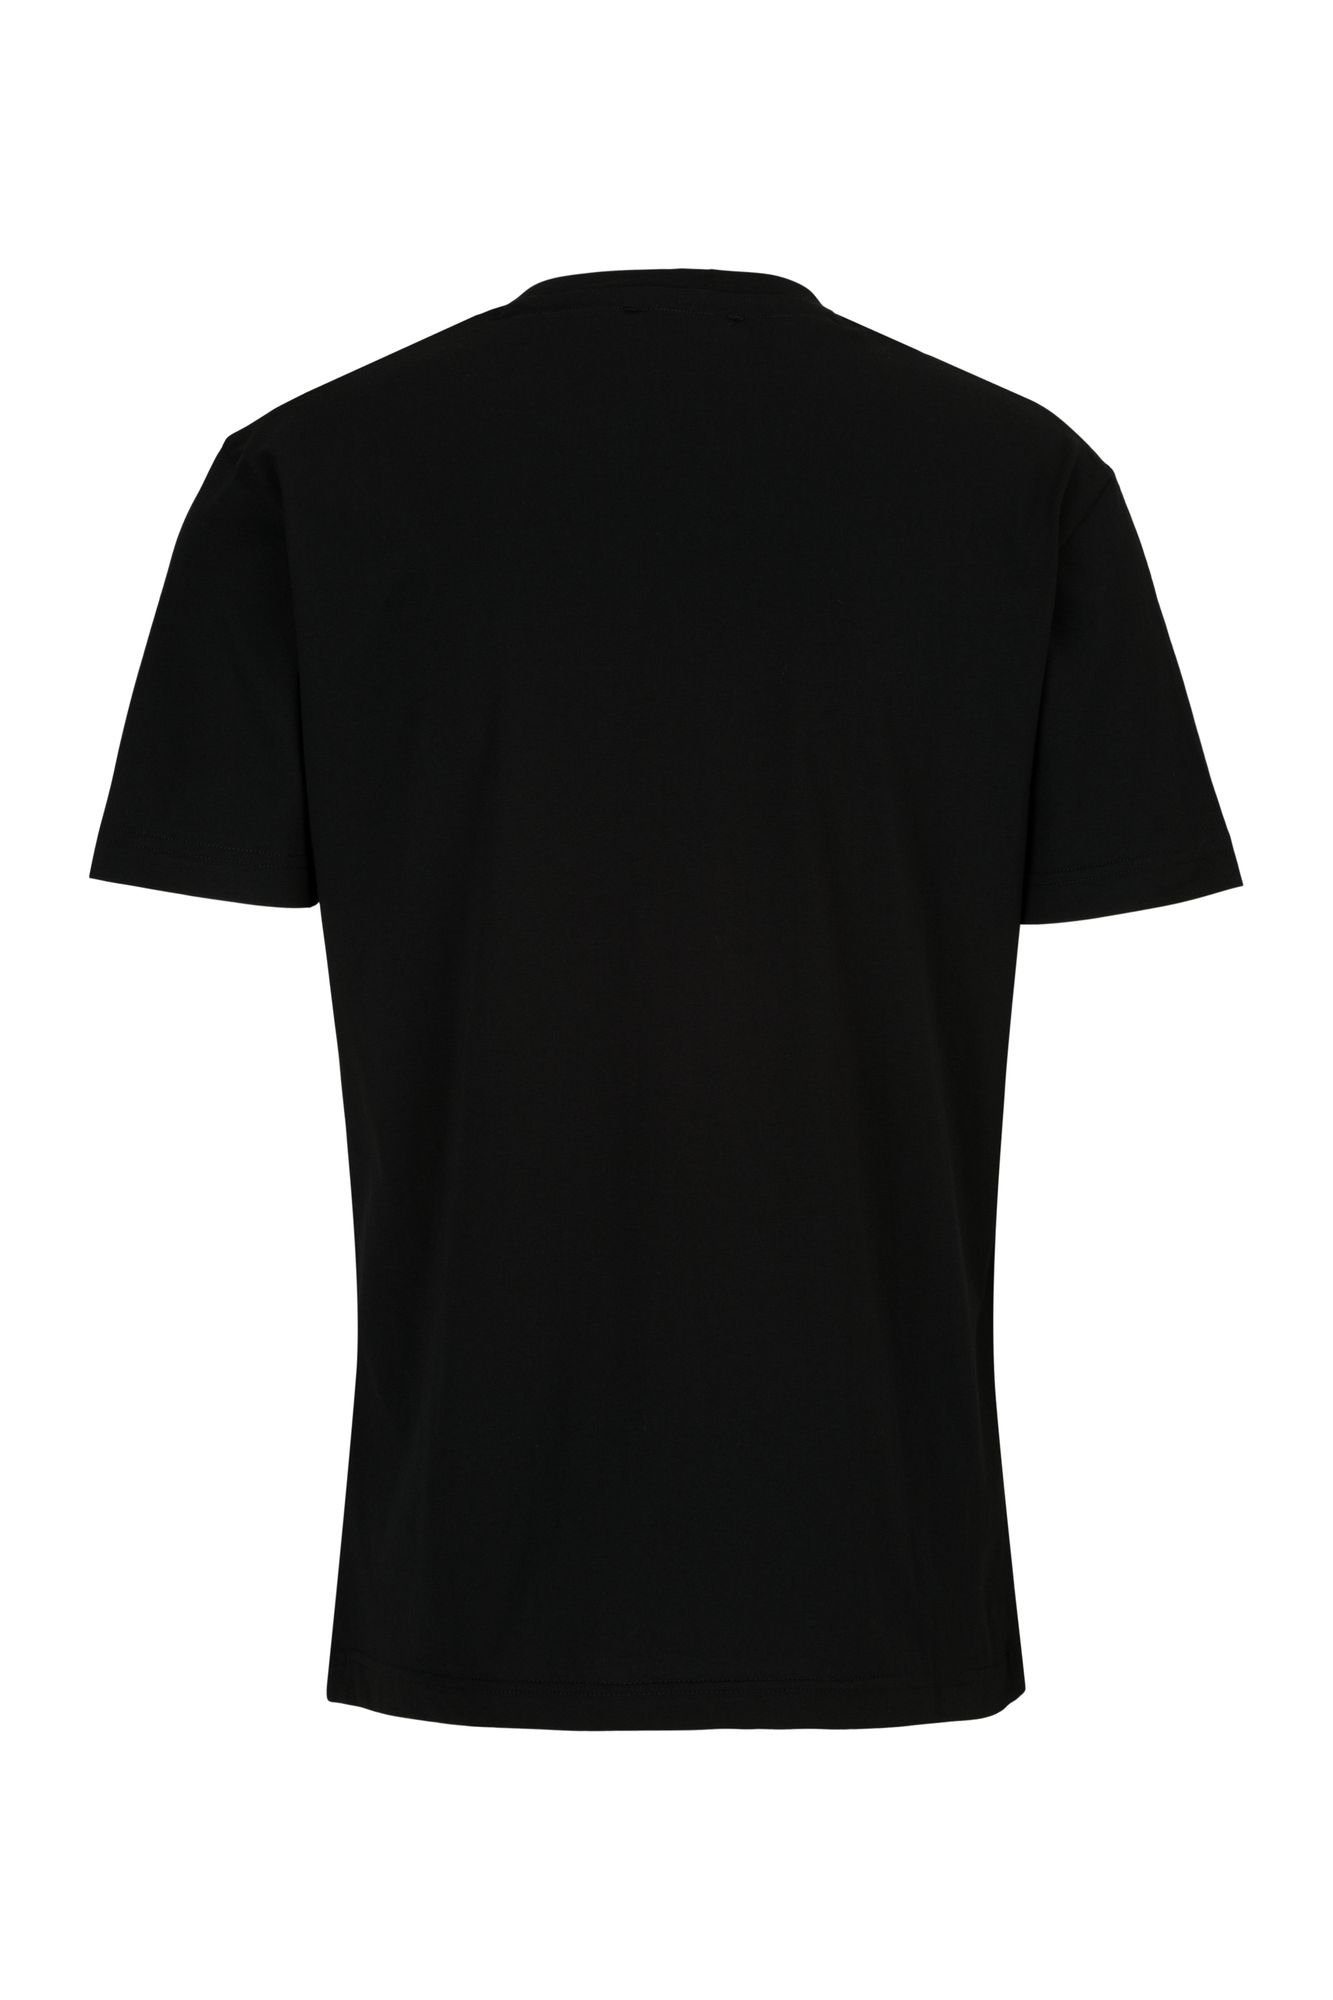 by Italia BLACK Versace Injection 19V69 T-Shirt